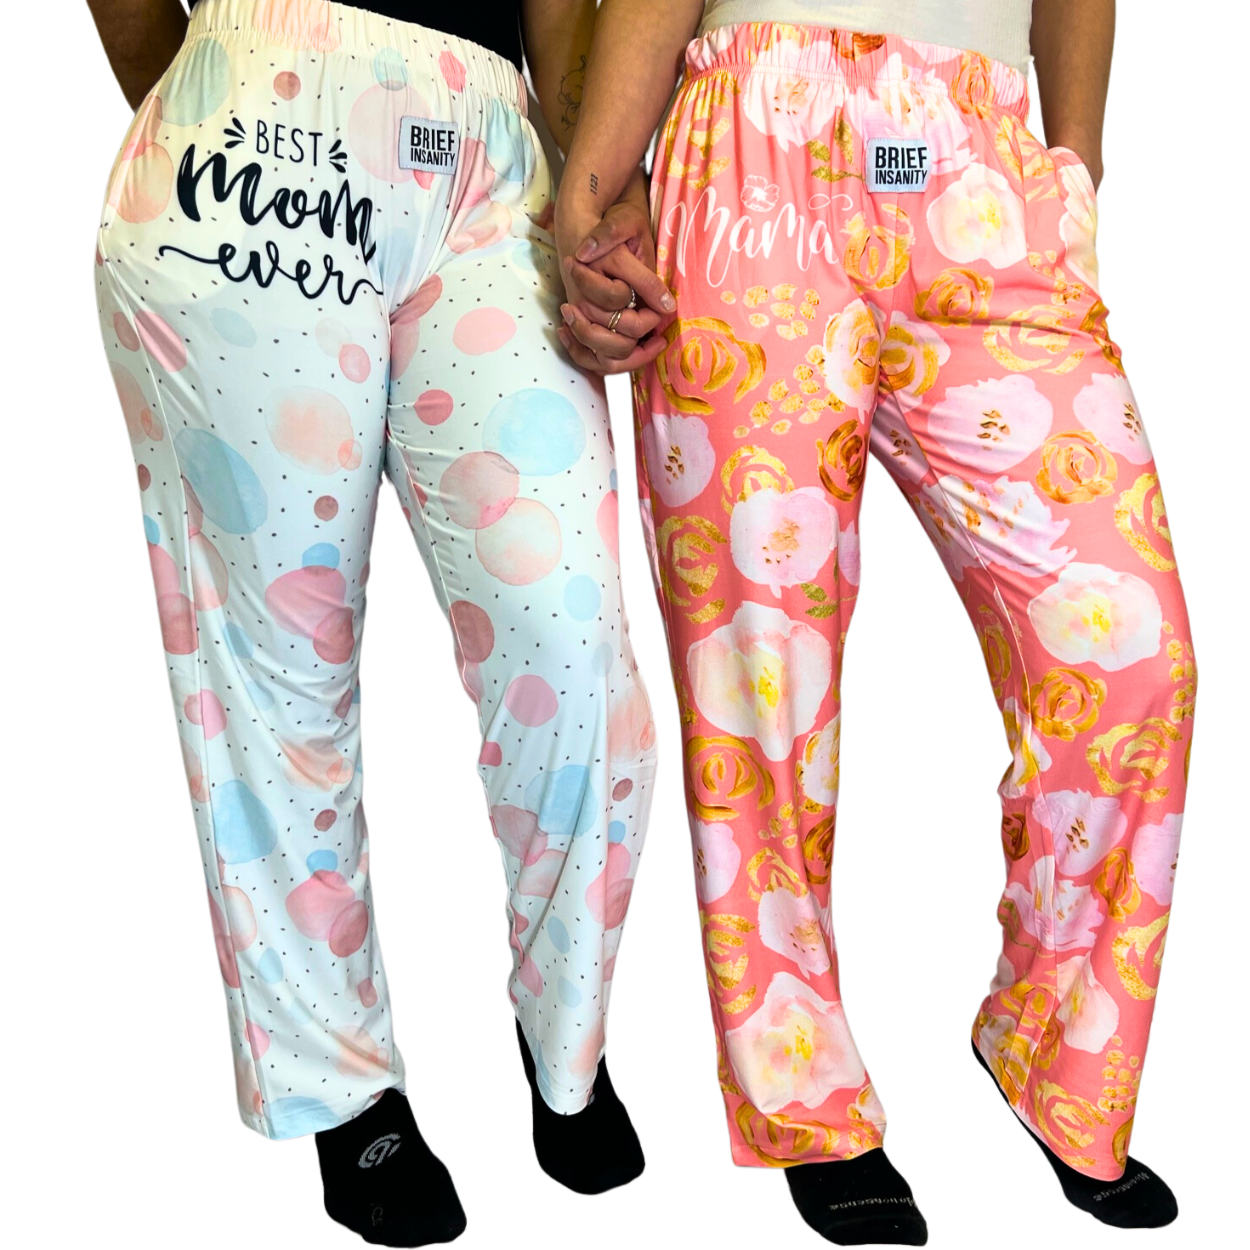 Mama Lounge Pants and Best Mom Ever Lounge pants on models